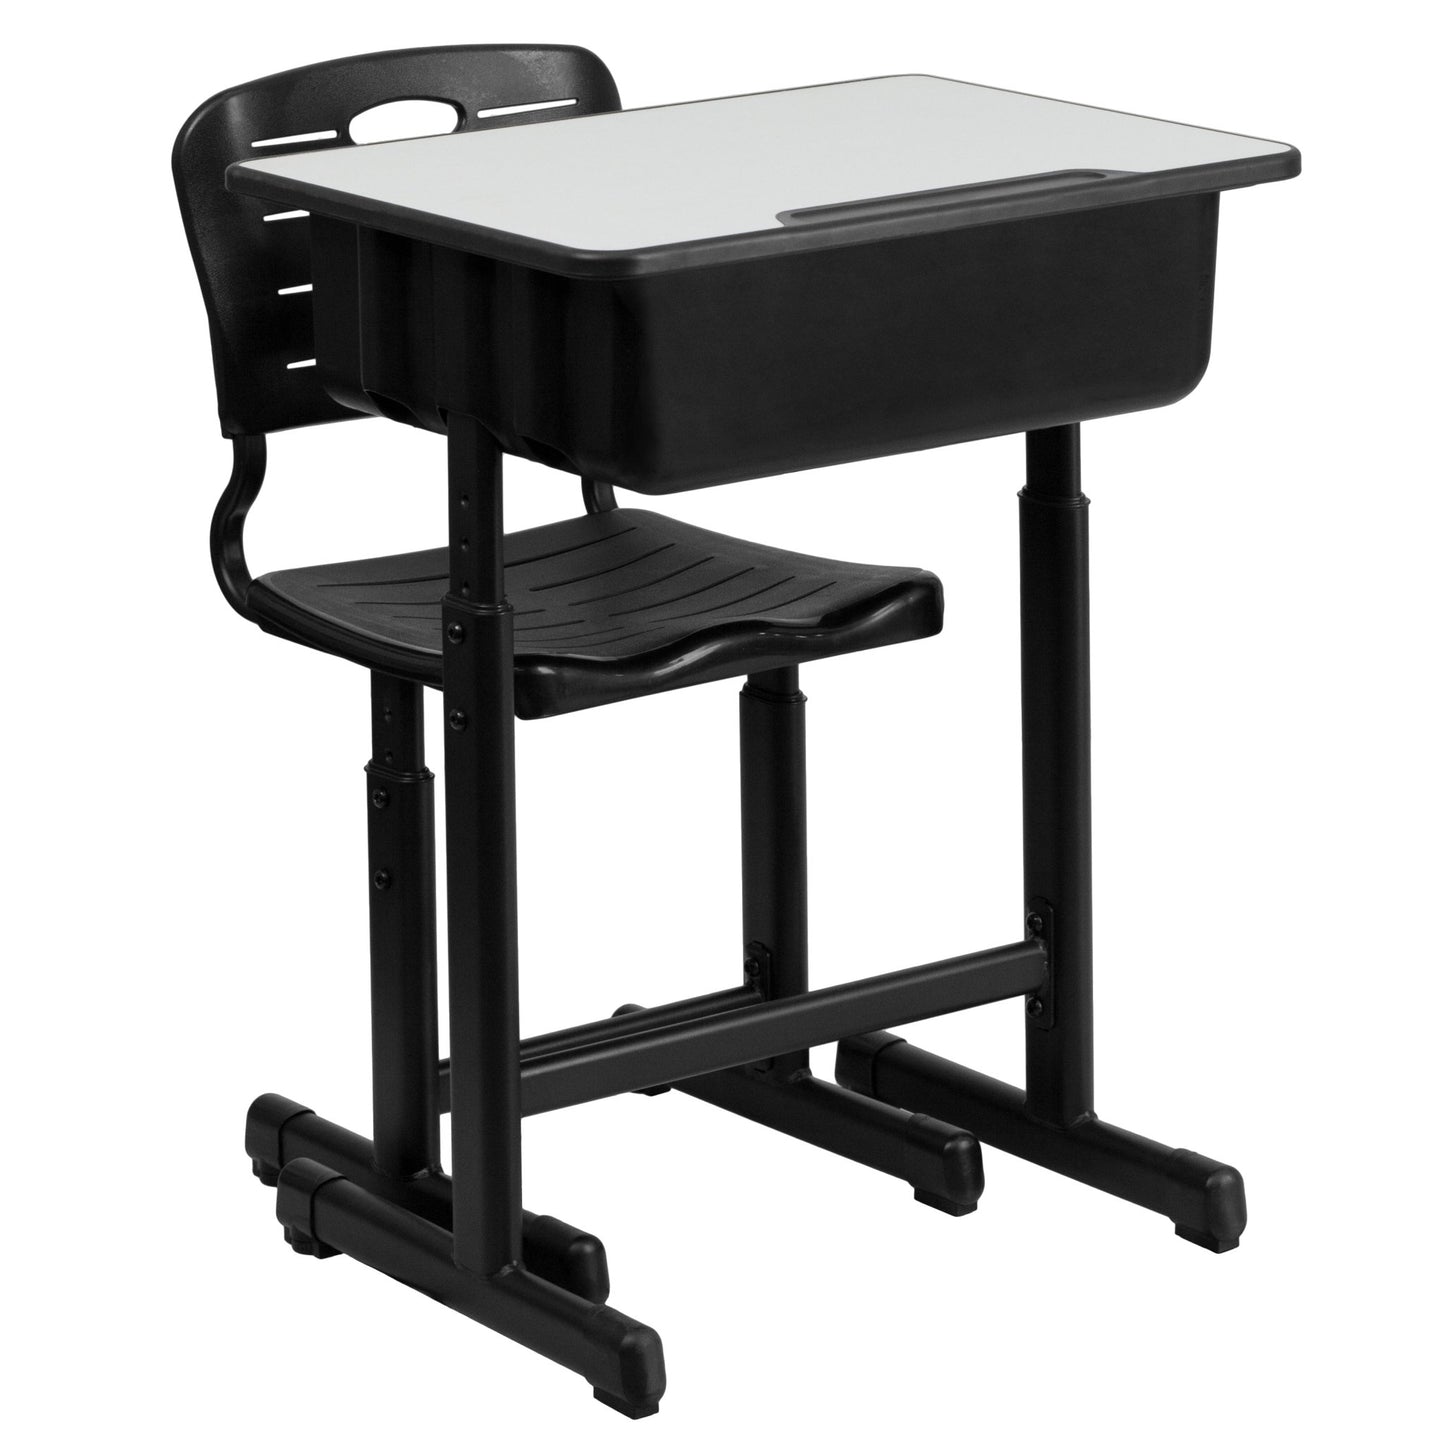 Nila Adjustable Height Student Desk and Chair with Black Pedestal Frame - SchoolOutlet